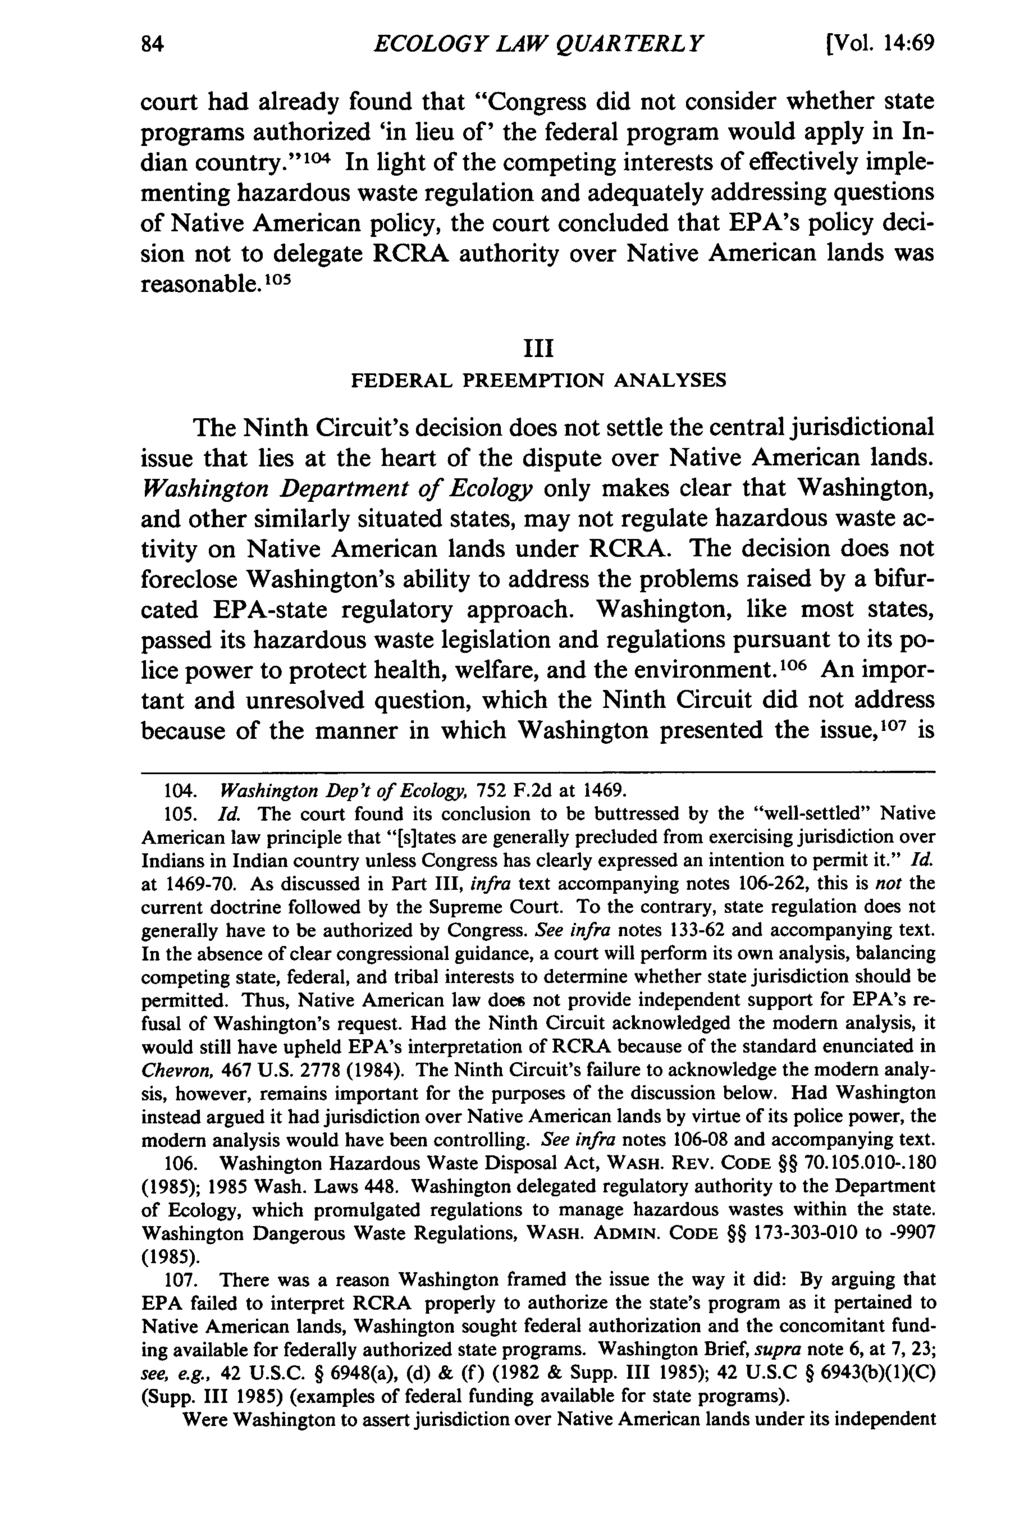 ECOLOGY LAW QUARTERLY [Vol. 14:69 court had already found that "Congress did not consider whether state programs authorized 'in lieu of' the federal program would apply in Indian country.